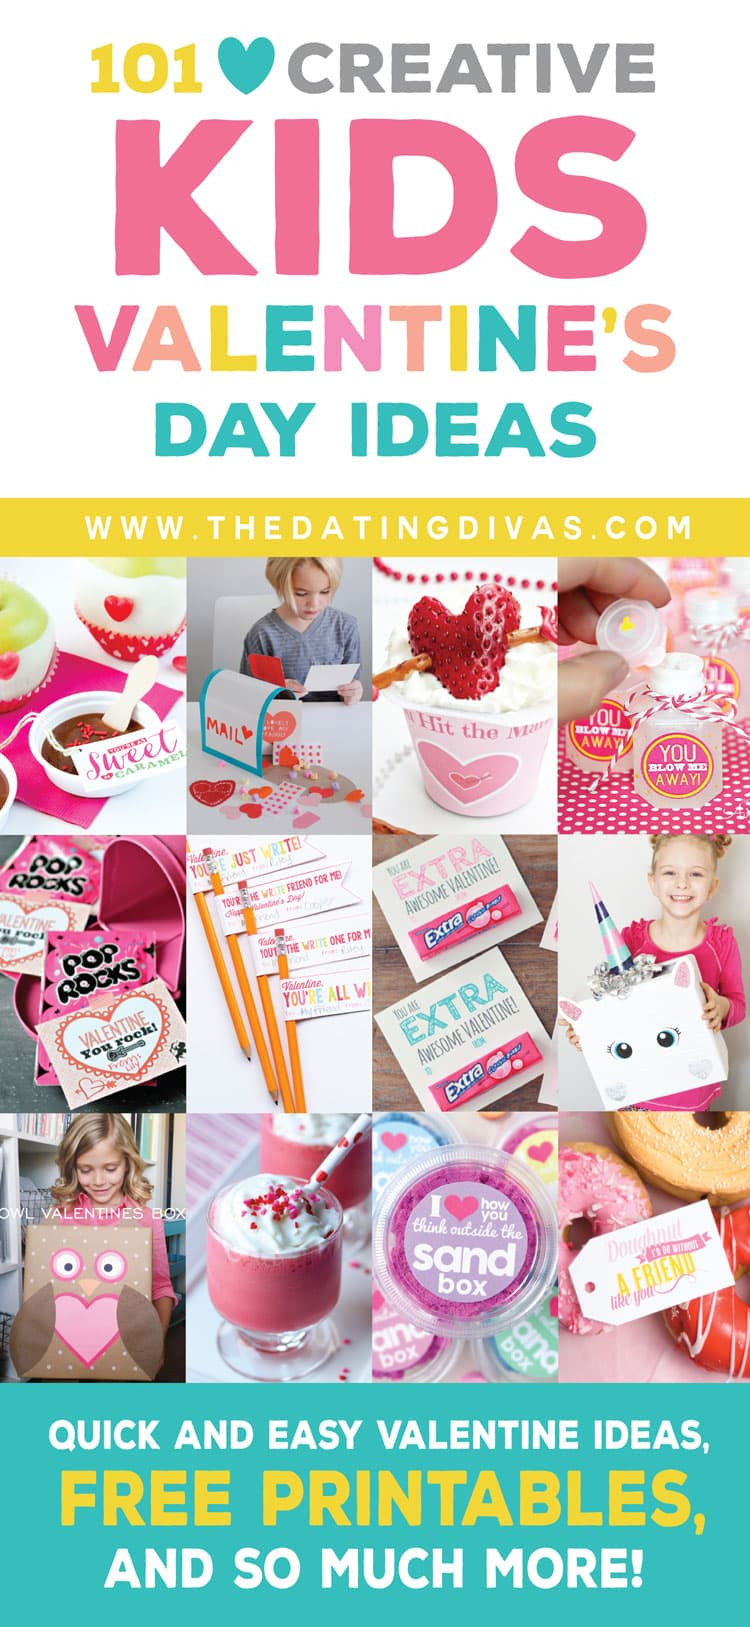 Valentines Day Creative Gift Ideas
 100 Kids Valentine s Day Ideas Treats Gifts & More